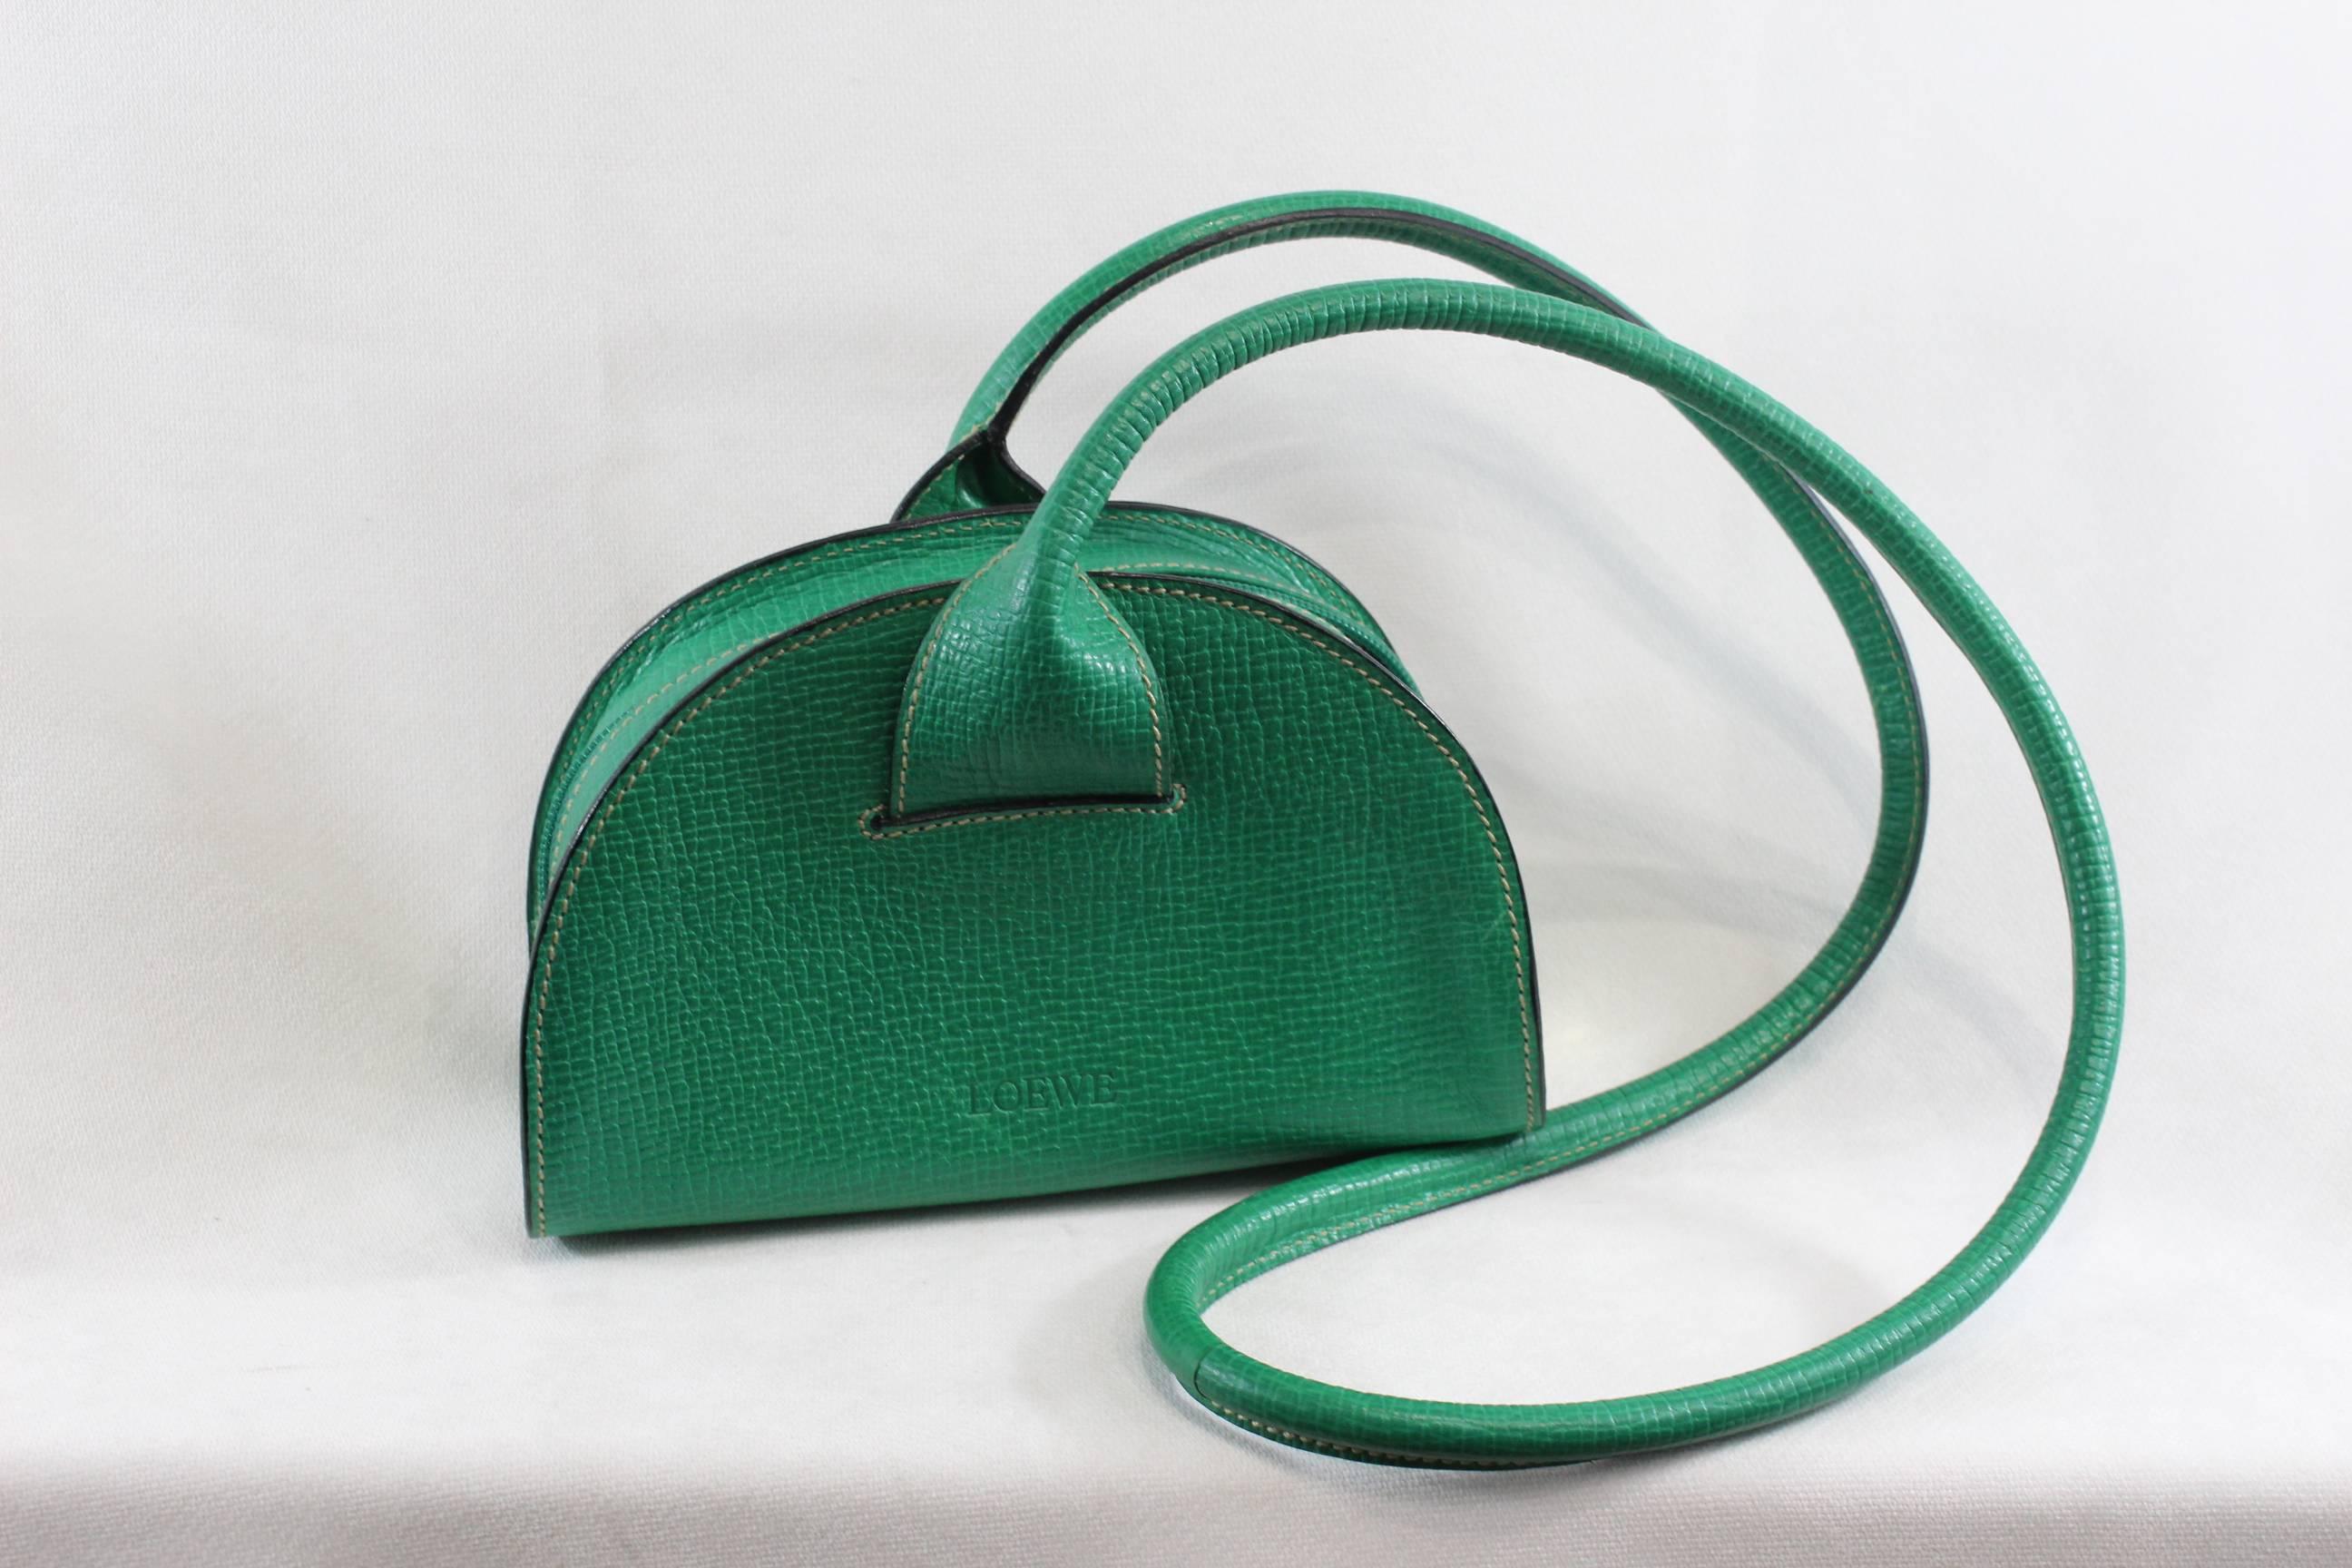 Super nice green leather bag from Loewe.

it ca nbe worn like a Clucth with a knot in the shoulder strap ot crossbody. Strap around 47 inches

really good conditoon